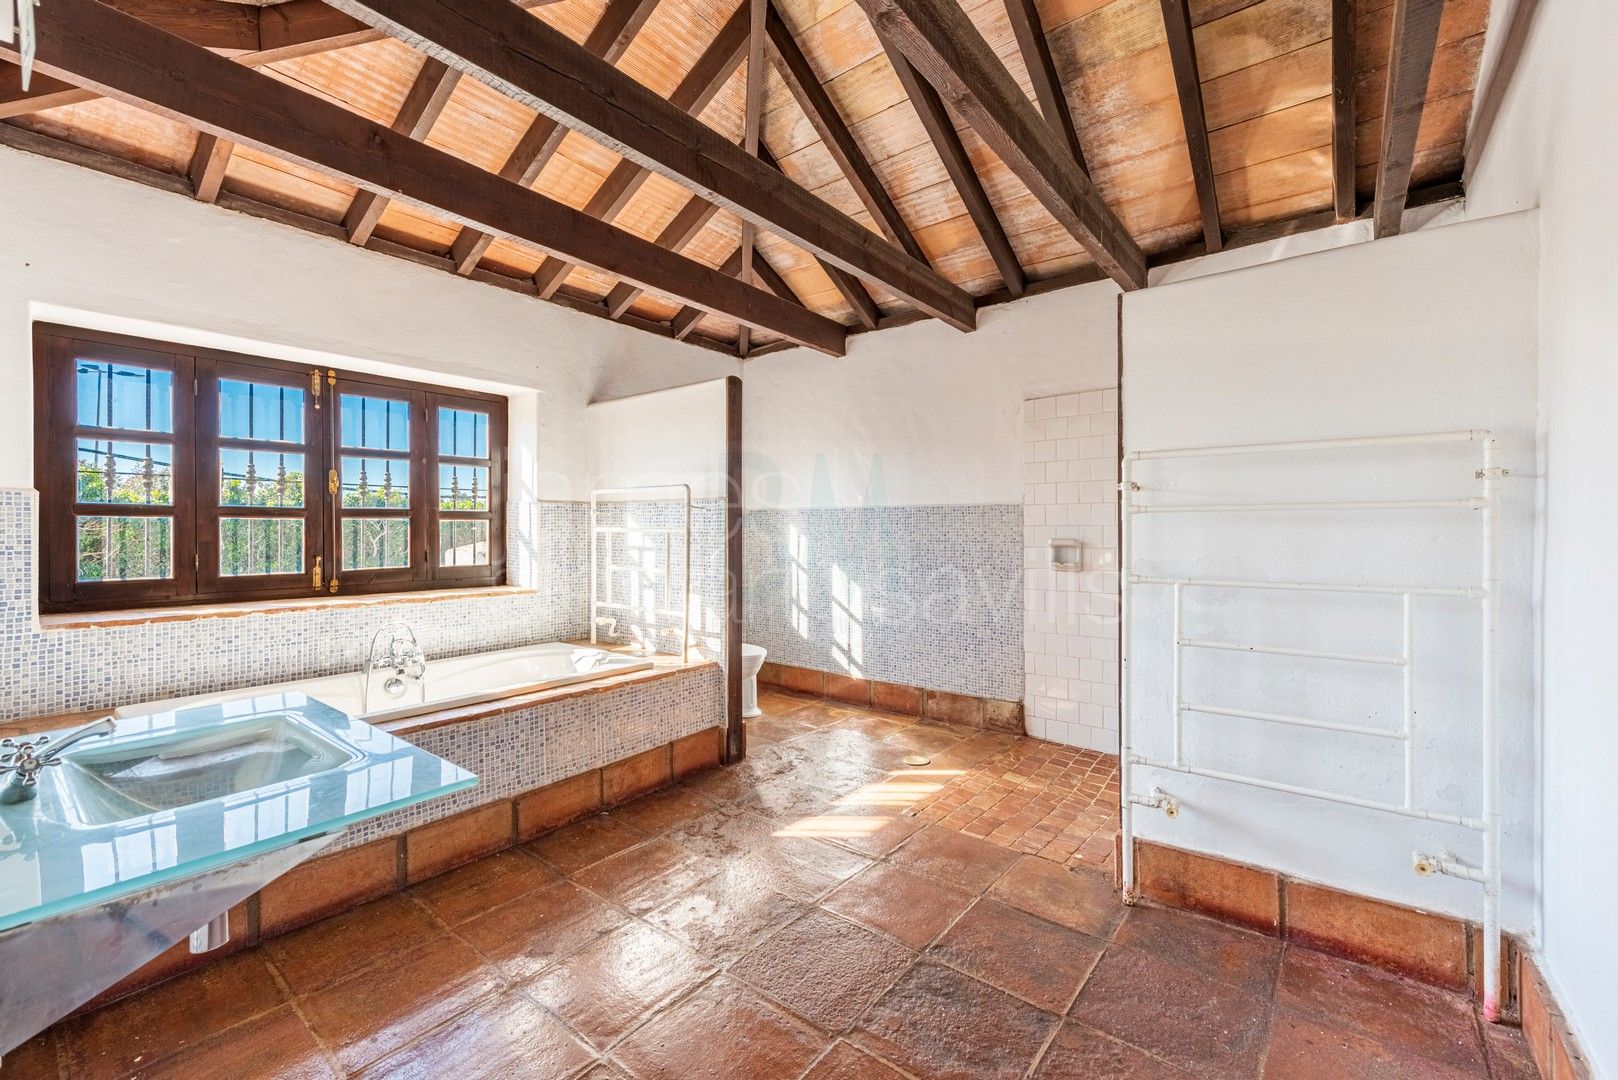 The perfect equestrian country home 10 mins drive from Sotogrande